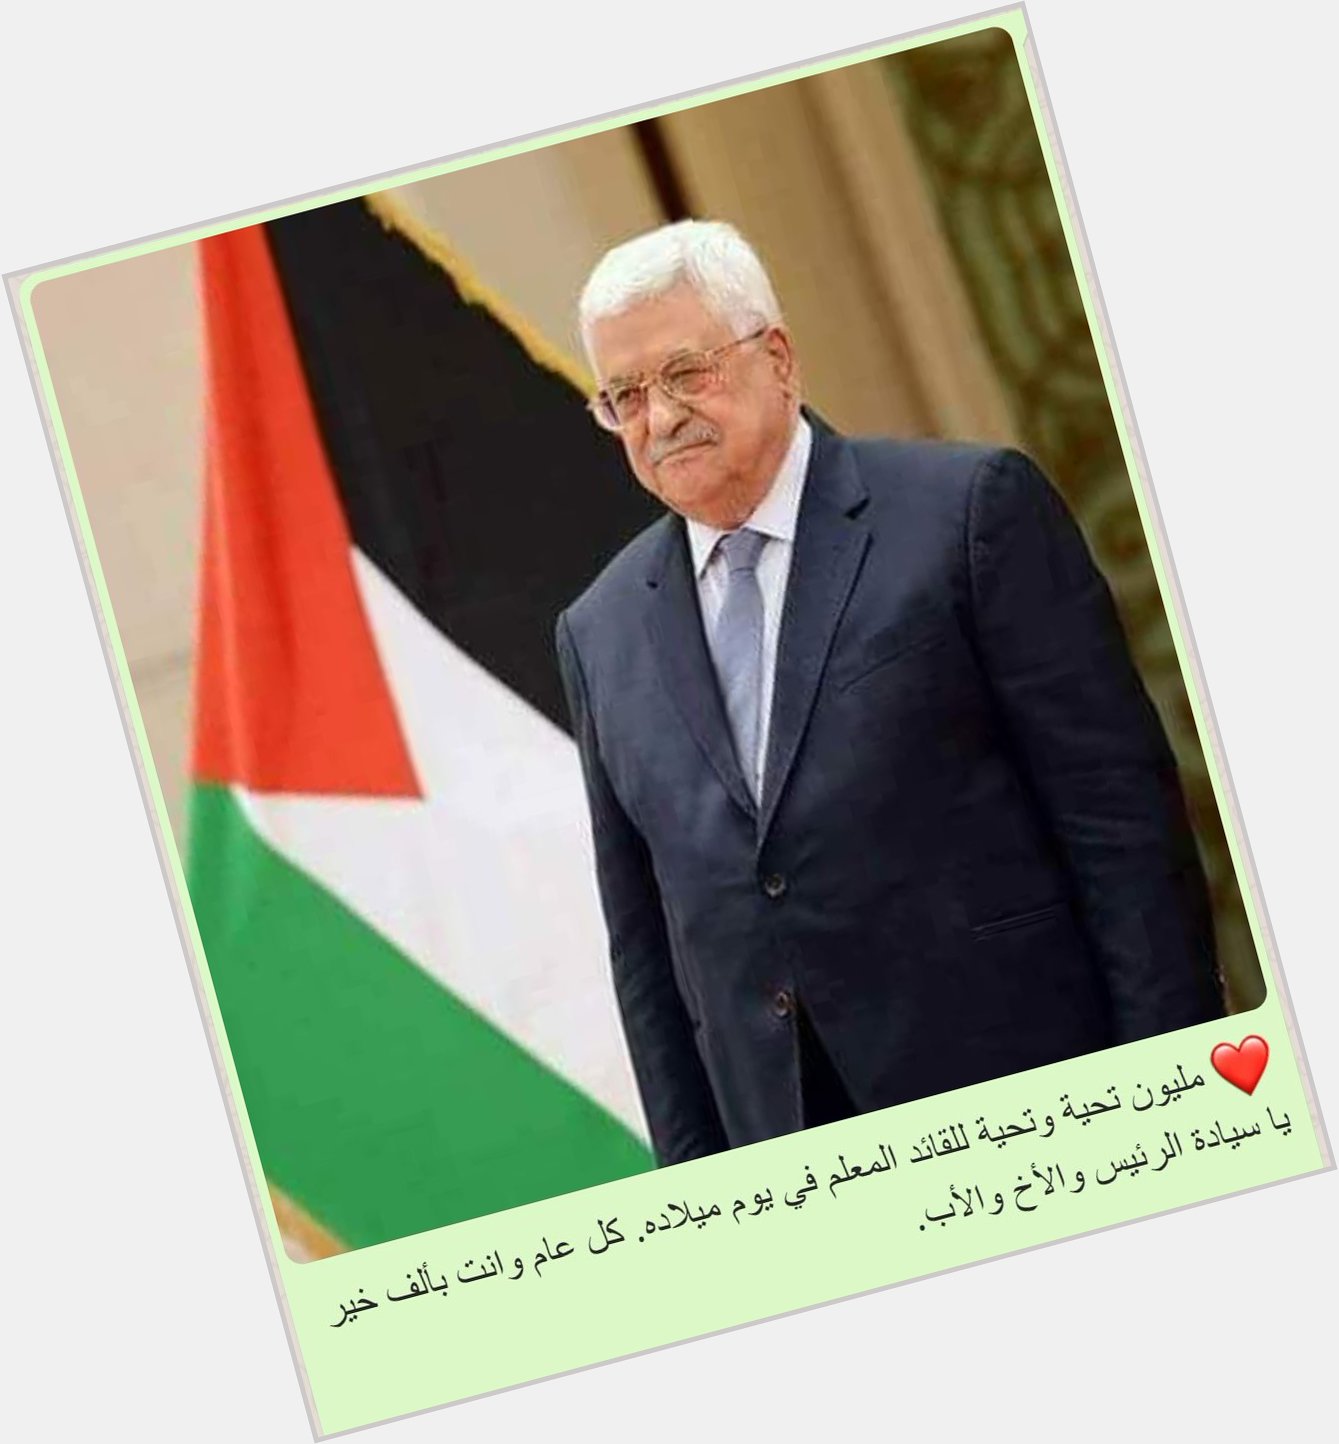 Happy Birthday to HE President Mahmoud Abbas of the State of Palestine. 